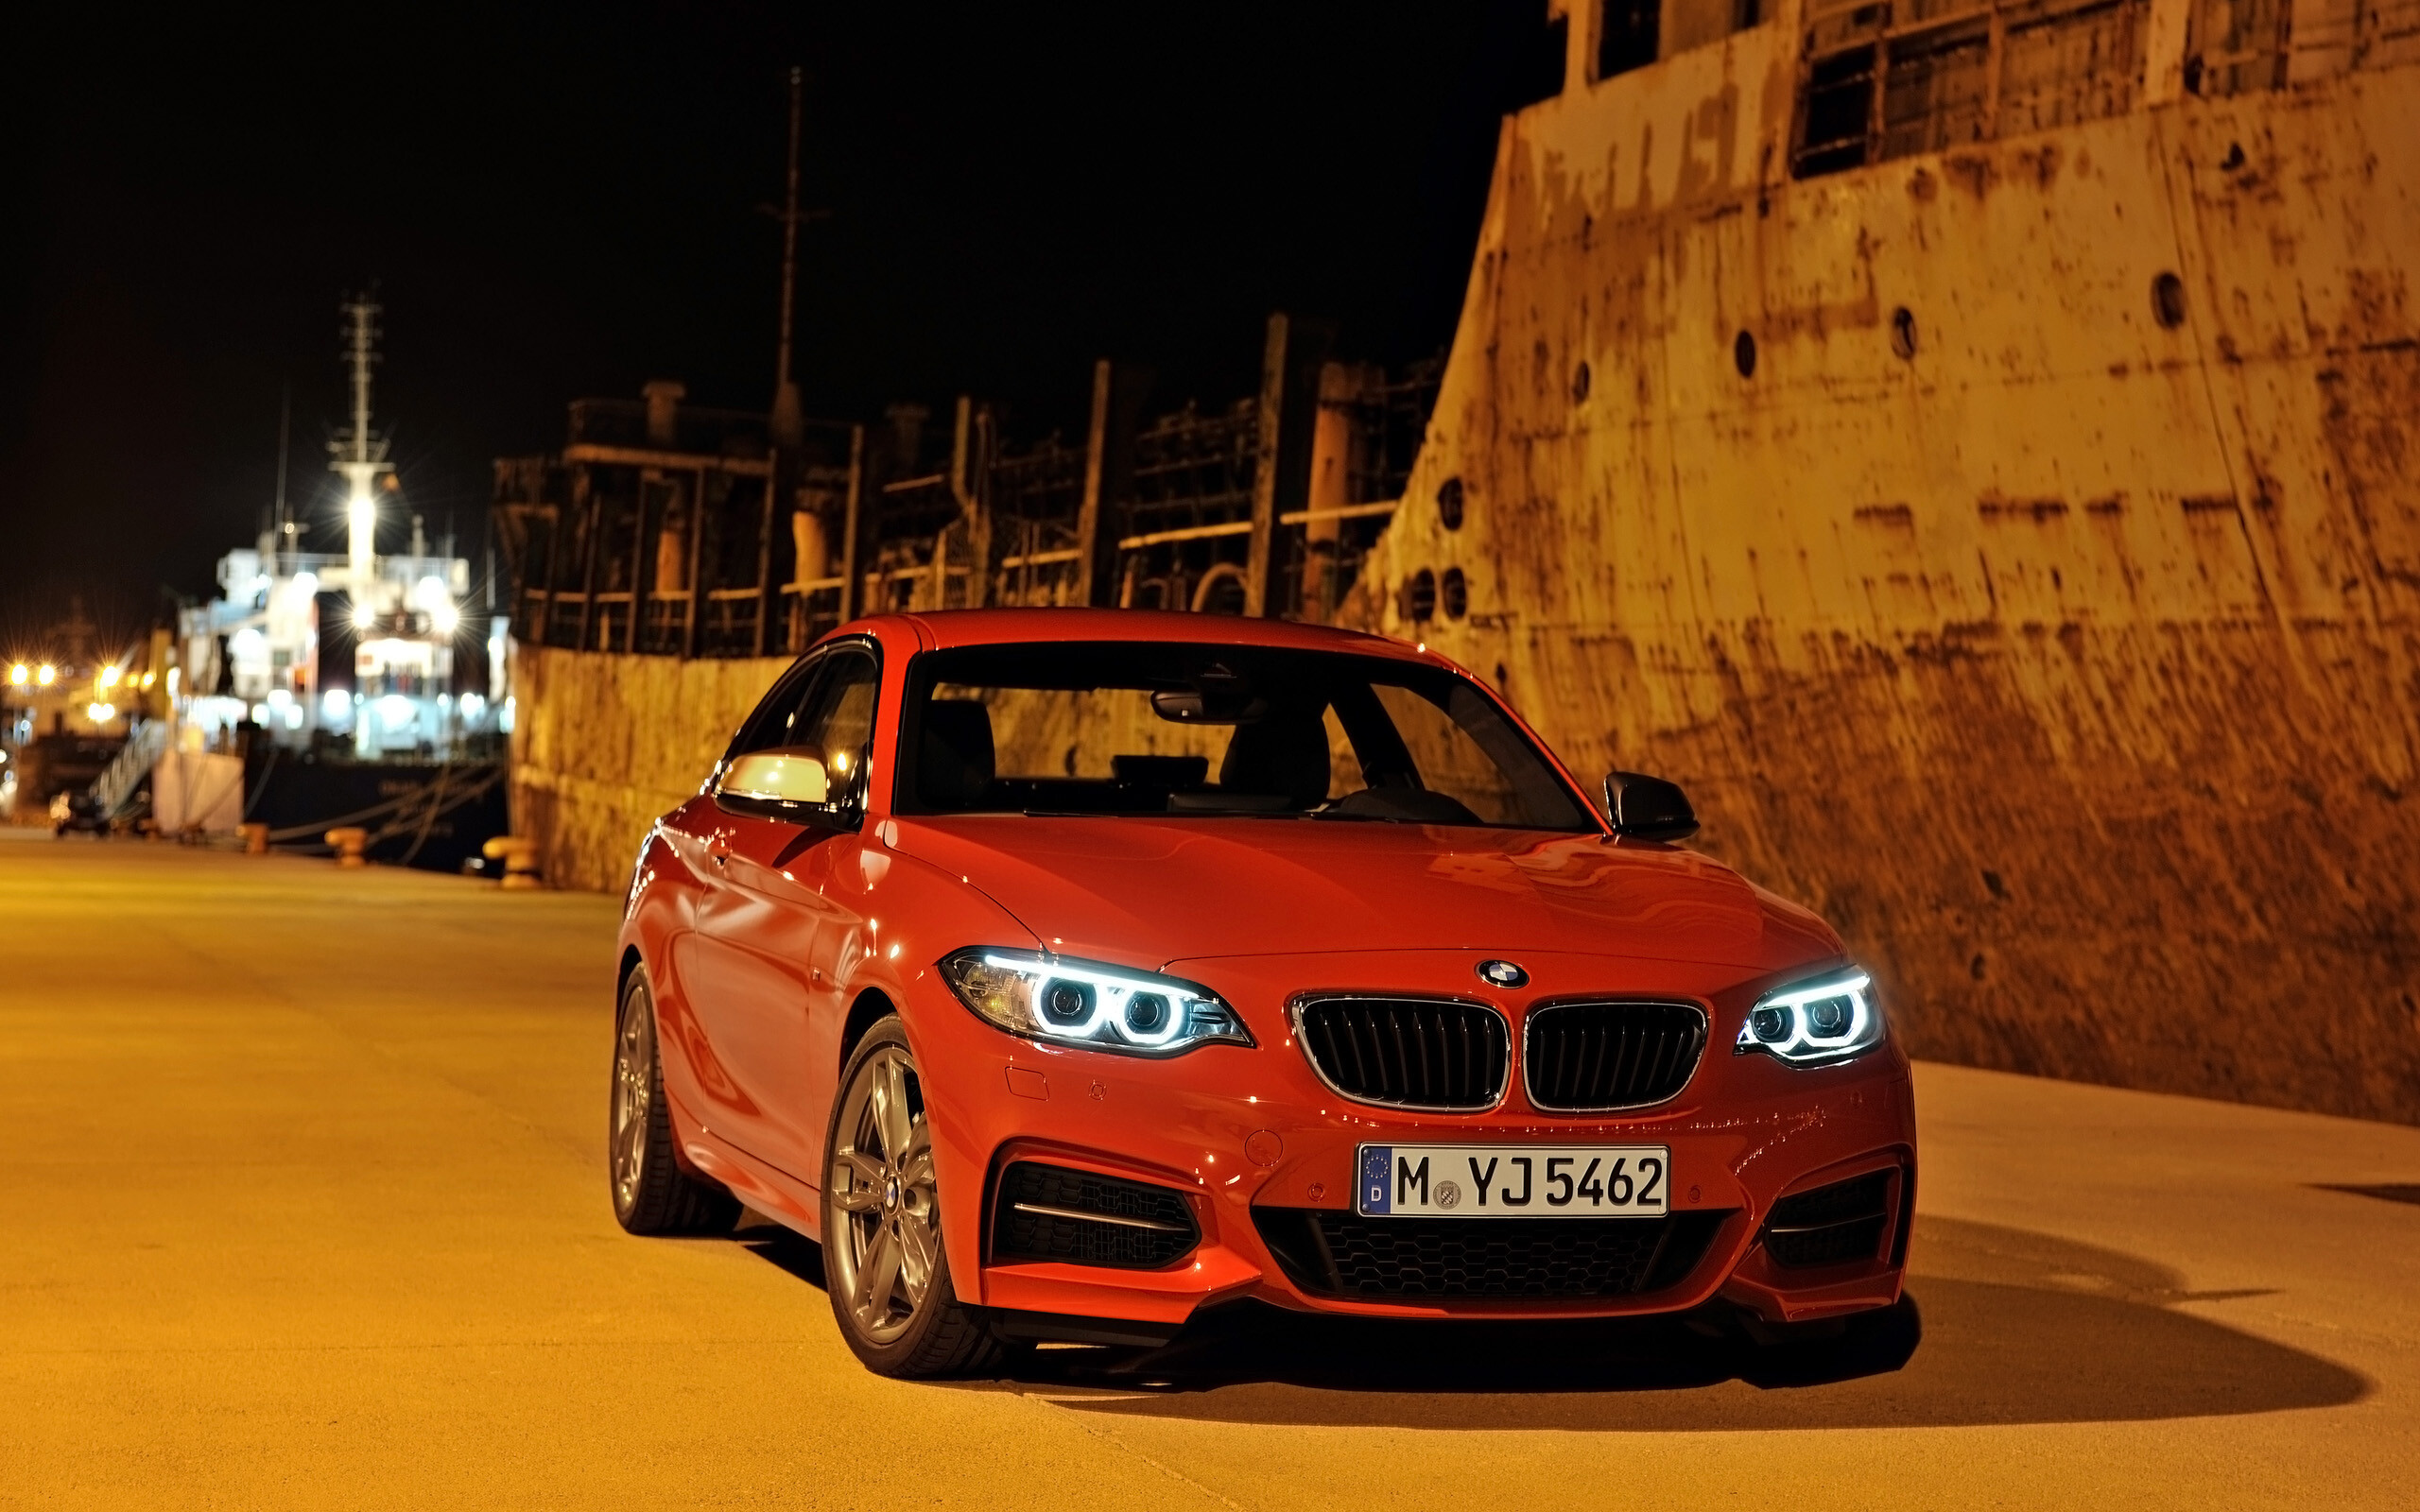 BMW 2 Series: Coupe version, A 2.0-liter four-cylinder turbocharged engine rated at 240 horsepower. 2560x1600 HD Background.